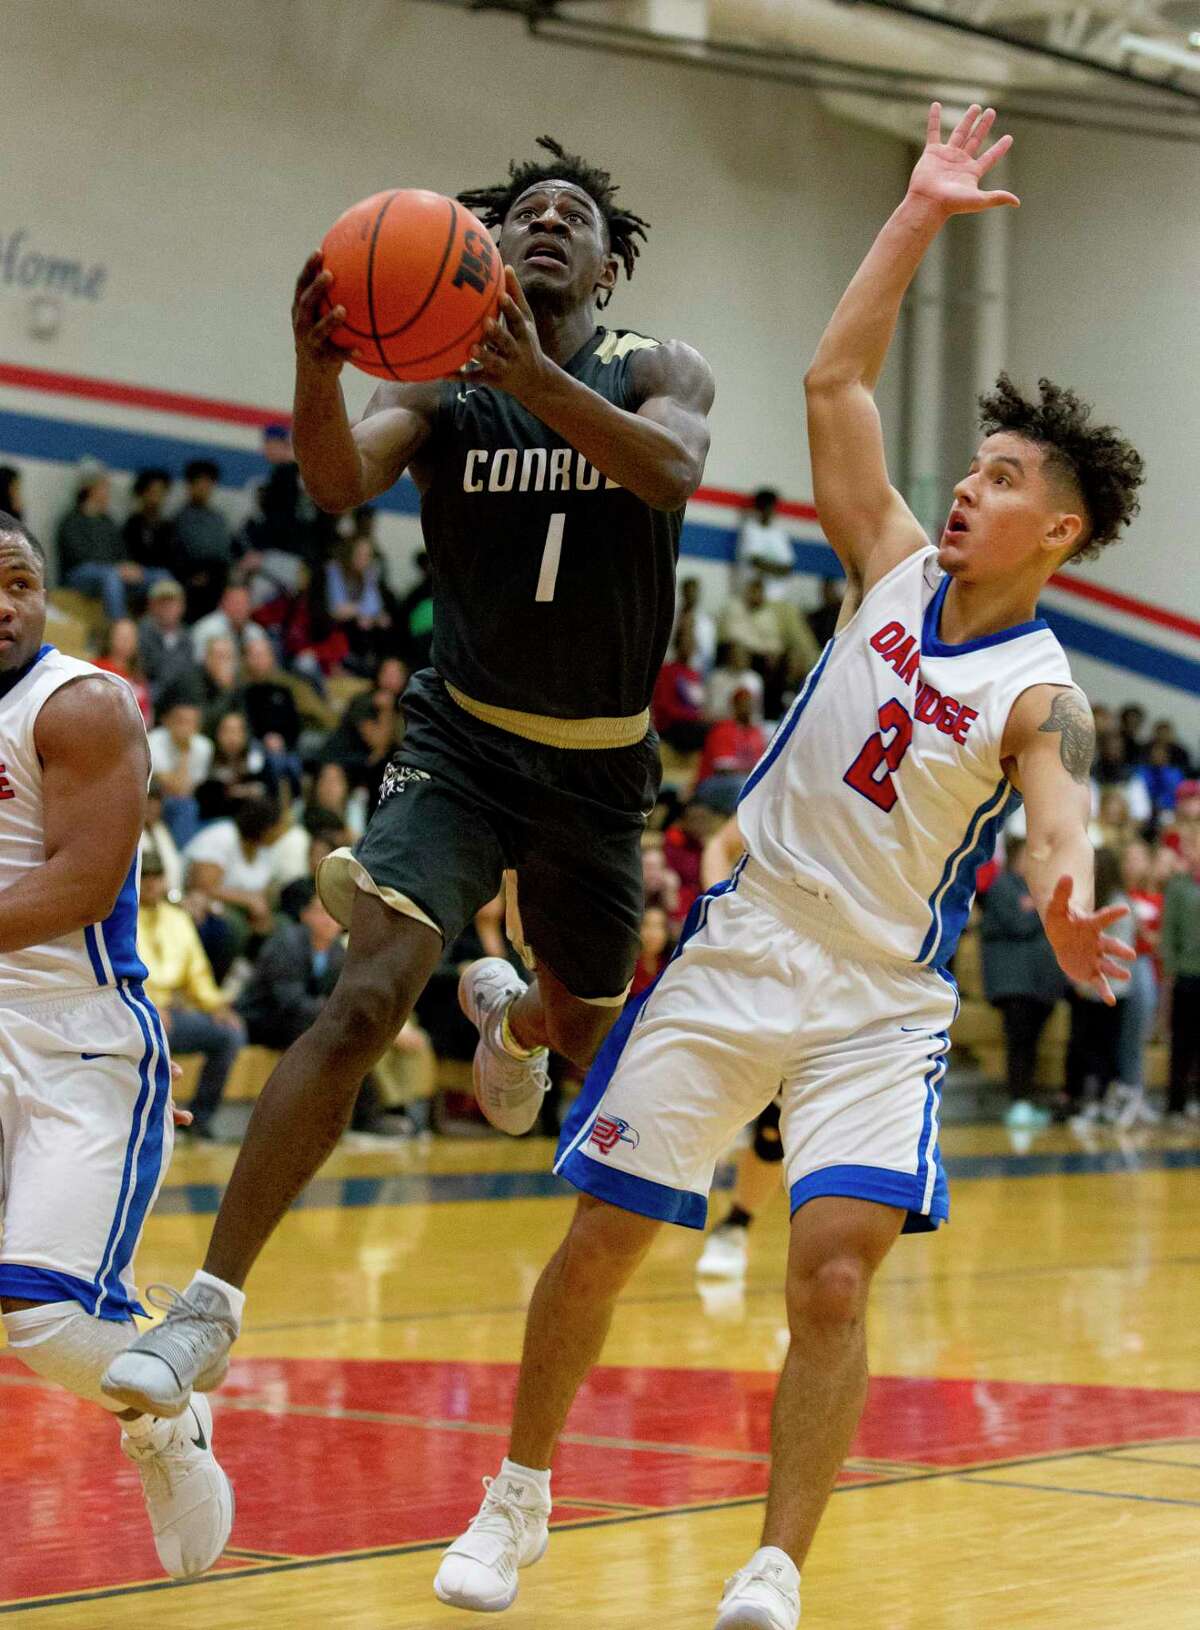 Conroe guard Jay Lewis (1) shoots under pressure by Oak Ridge guard Cristian Calix (2) during the fourth quarter of a District 12-6A high school boys basketball game at Oak Ridge High School, Friday, Jan. 12, 2018.